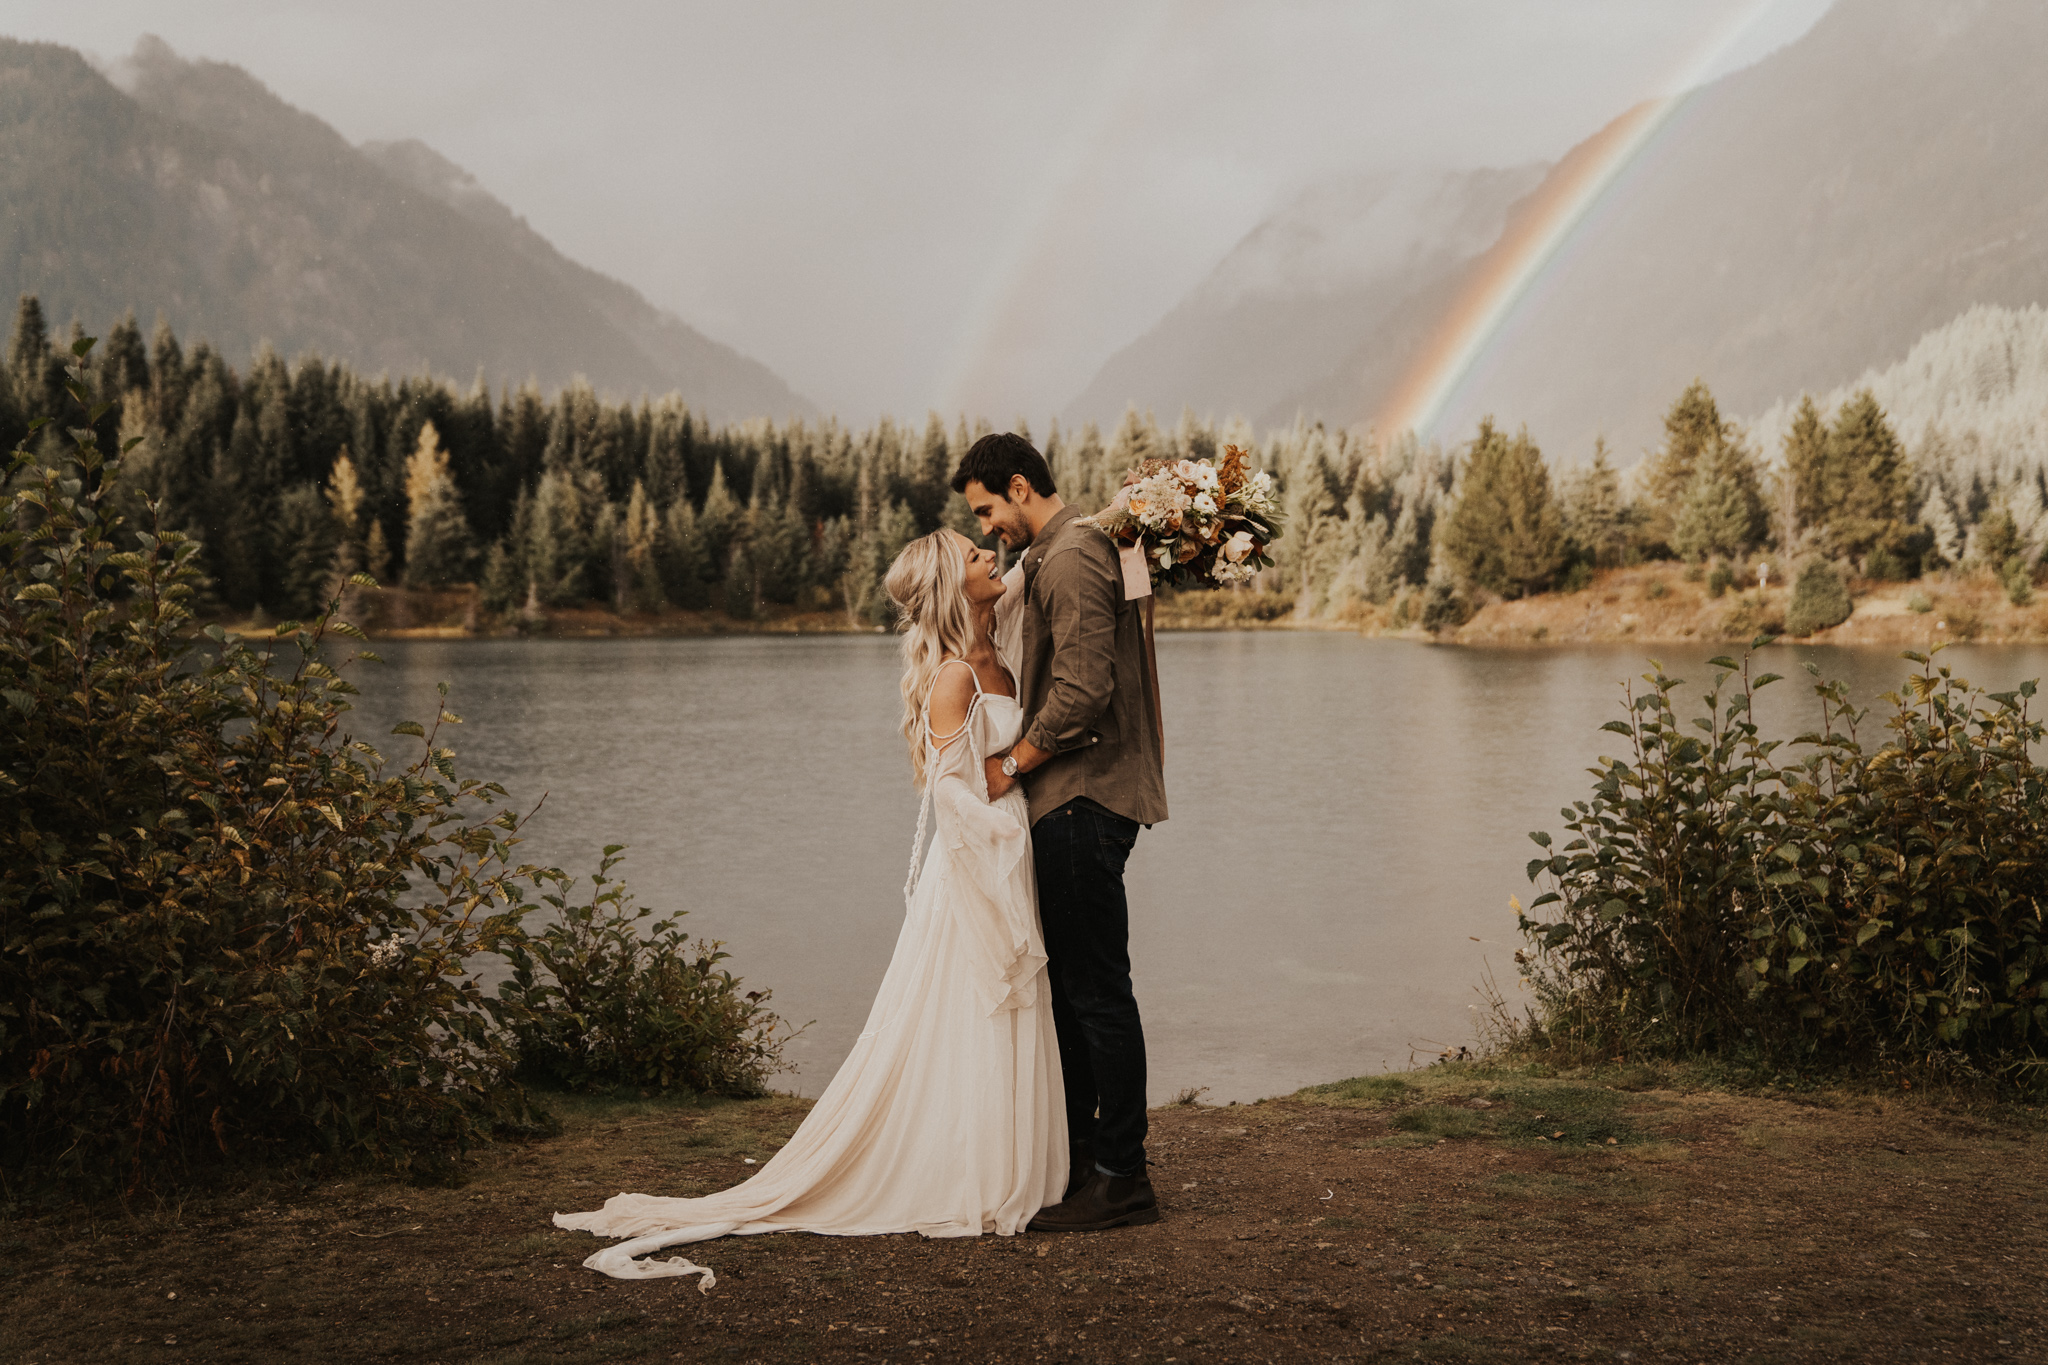 Rustic Bohemian Elopement Inspiration with Earthy Tones